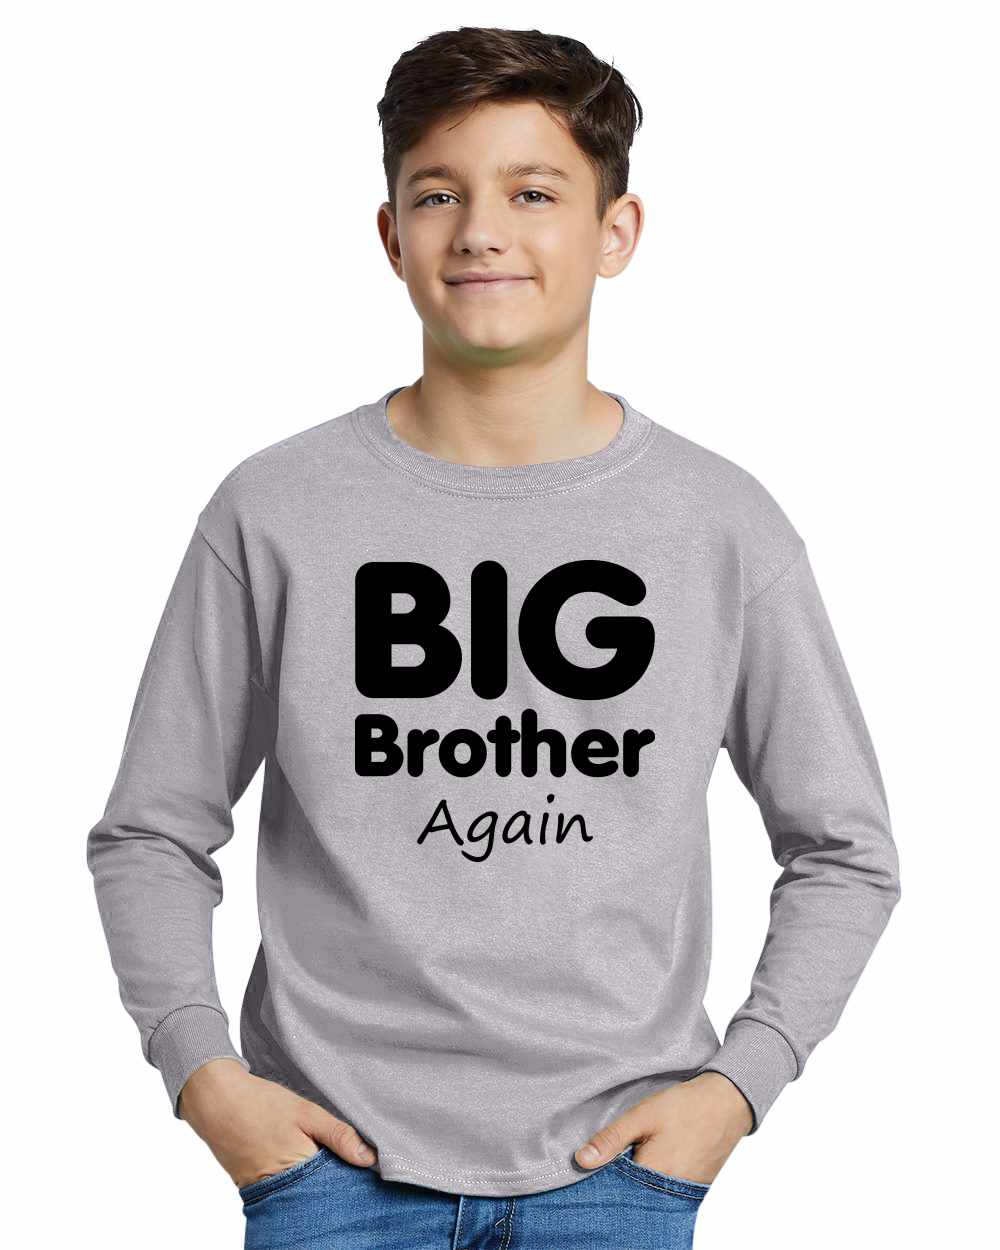 Big Brother Again on Youth Long Sleeve Shirt (#858-203)